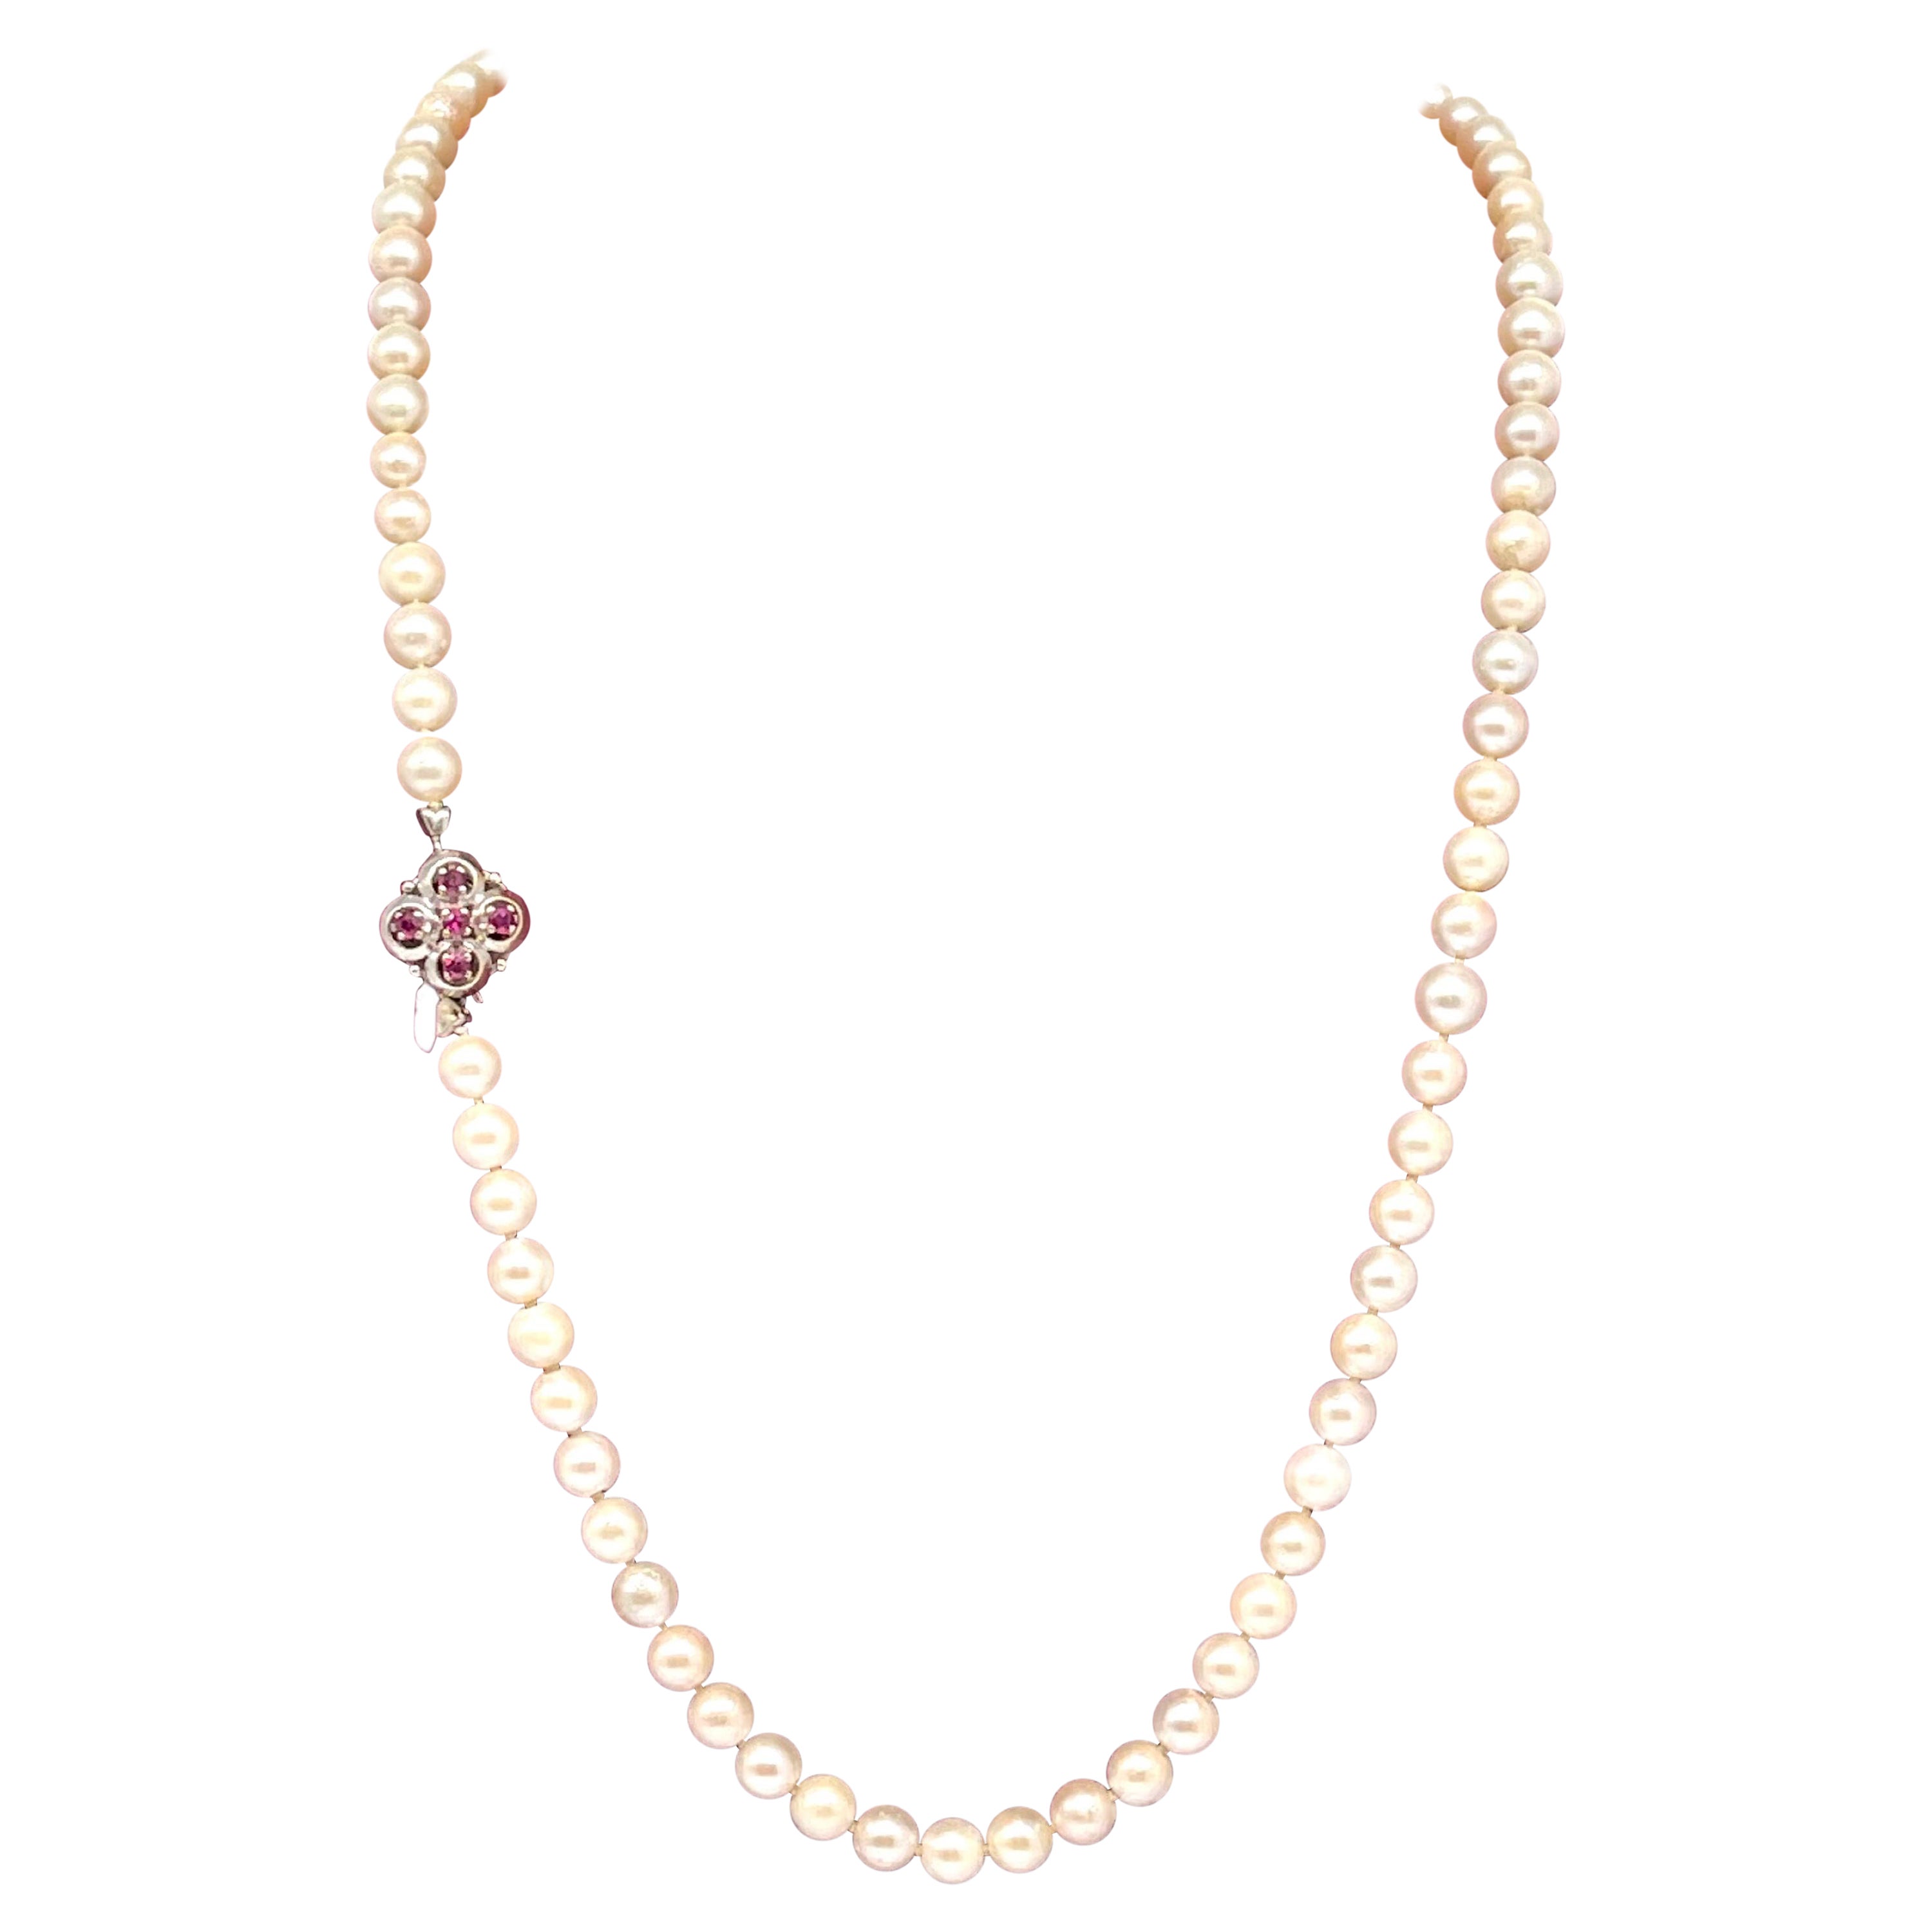 Akoya Pearl Necklace with 14 kt. White Gold and Ruby Clasp For Sale